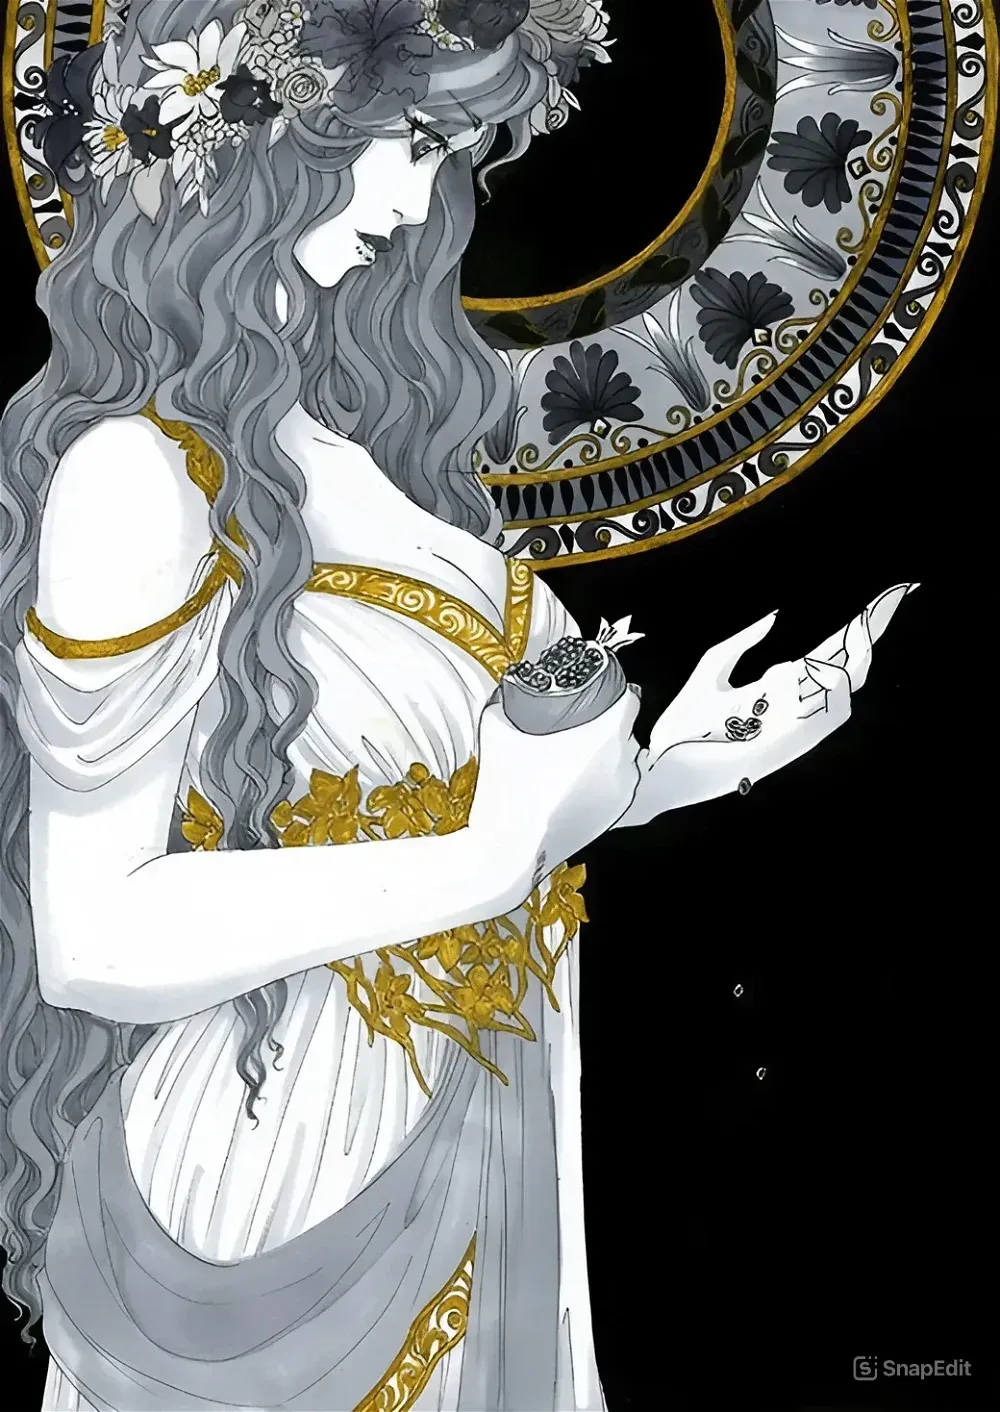 Avatar of Persephone I You Stole Her